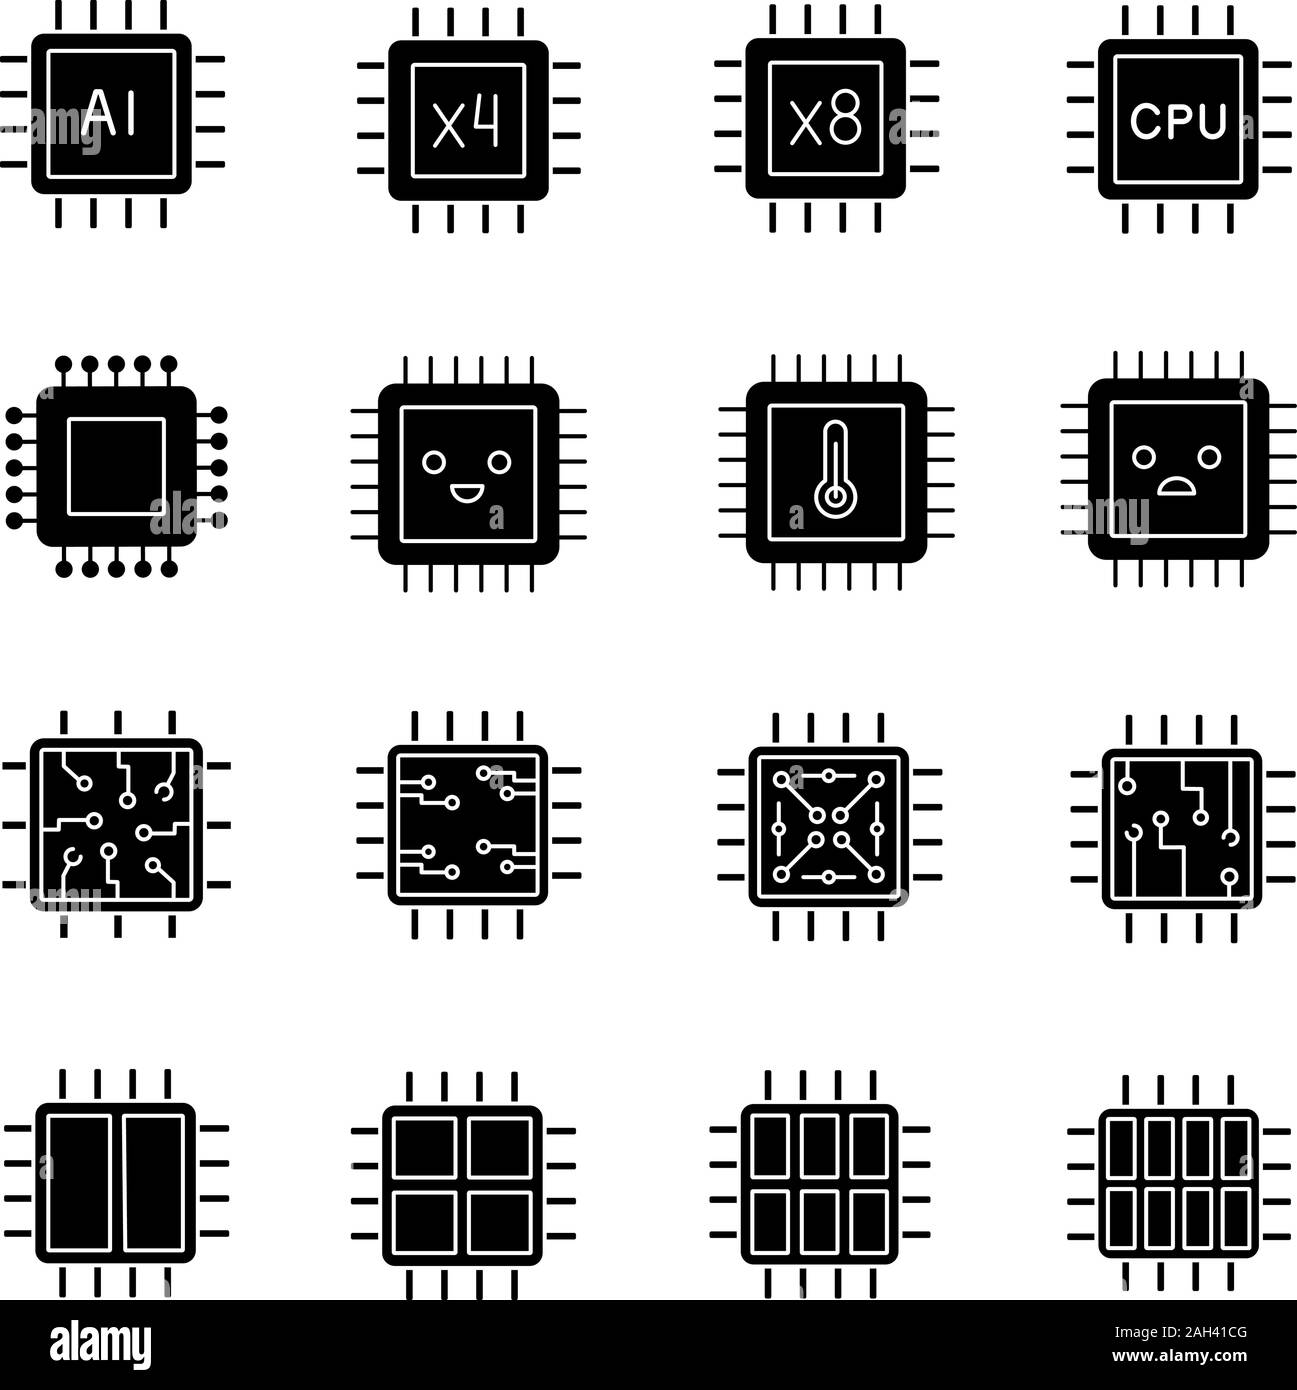 Processors glyph icons set. Multi-core processors. Chips, microchips, chipsets. CPU. Central processing units. Integrated circuits. Silhouette symbols Stock Vector